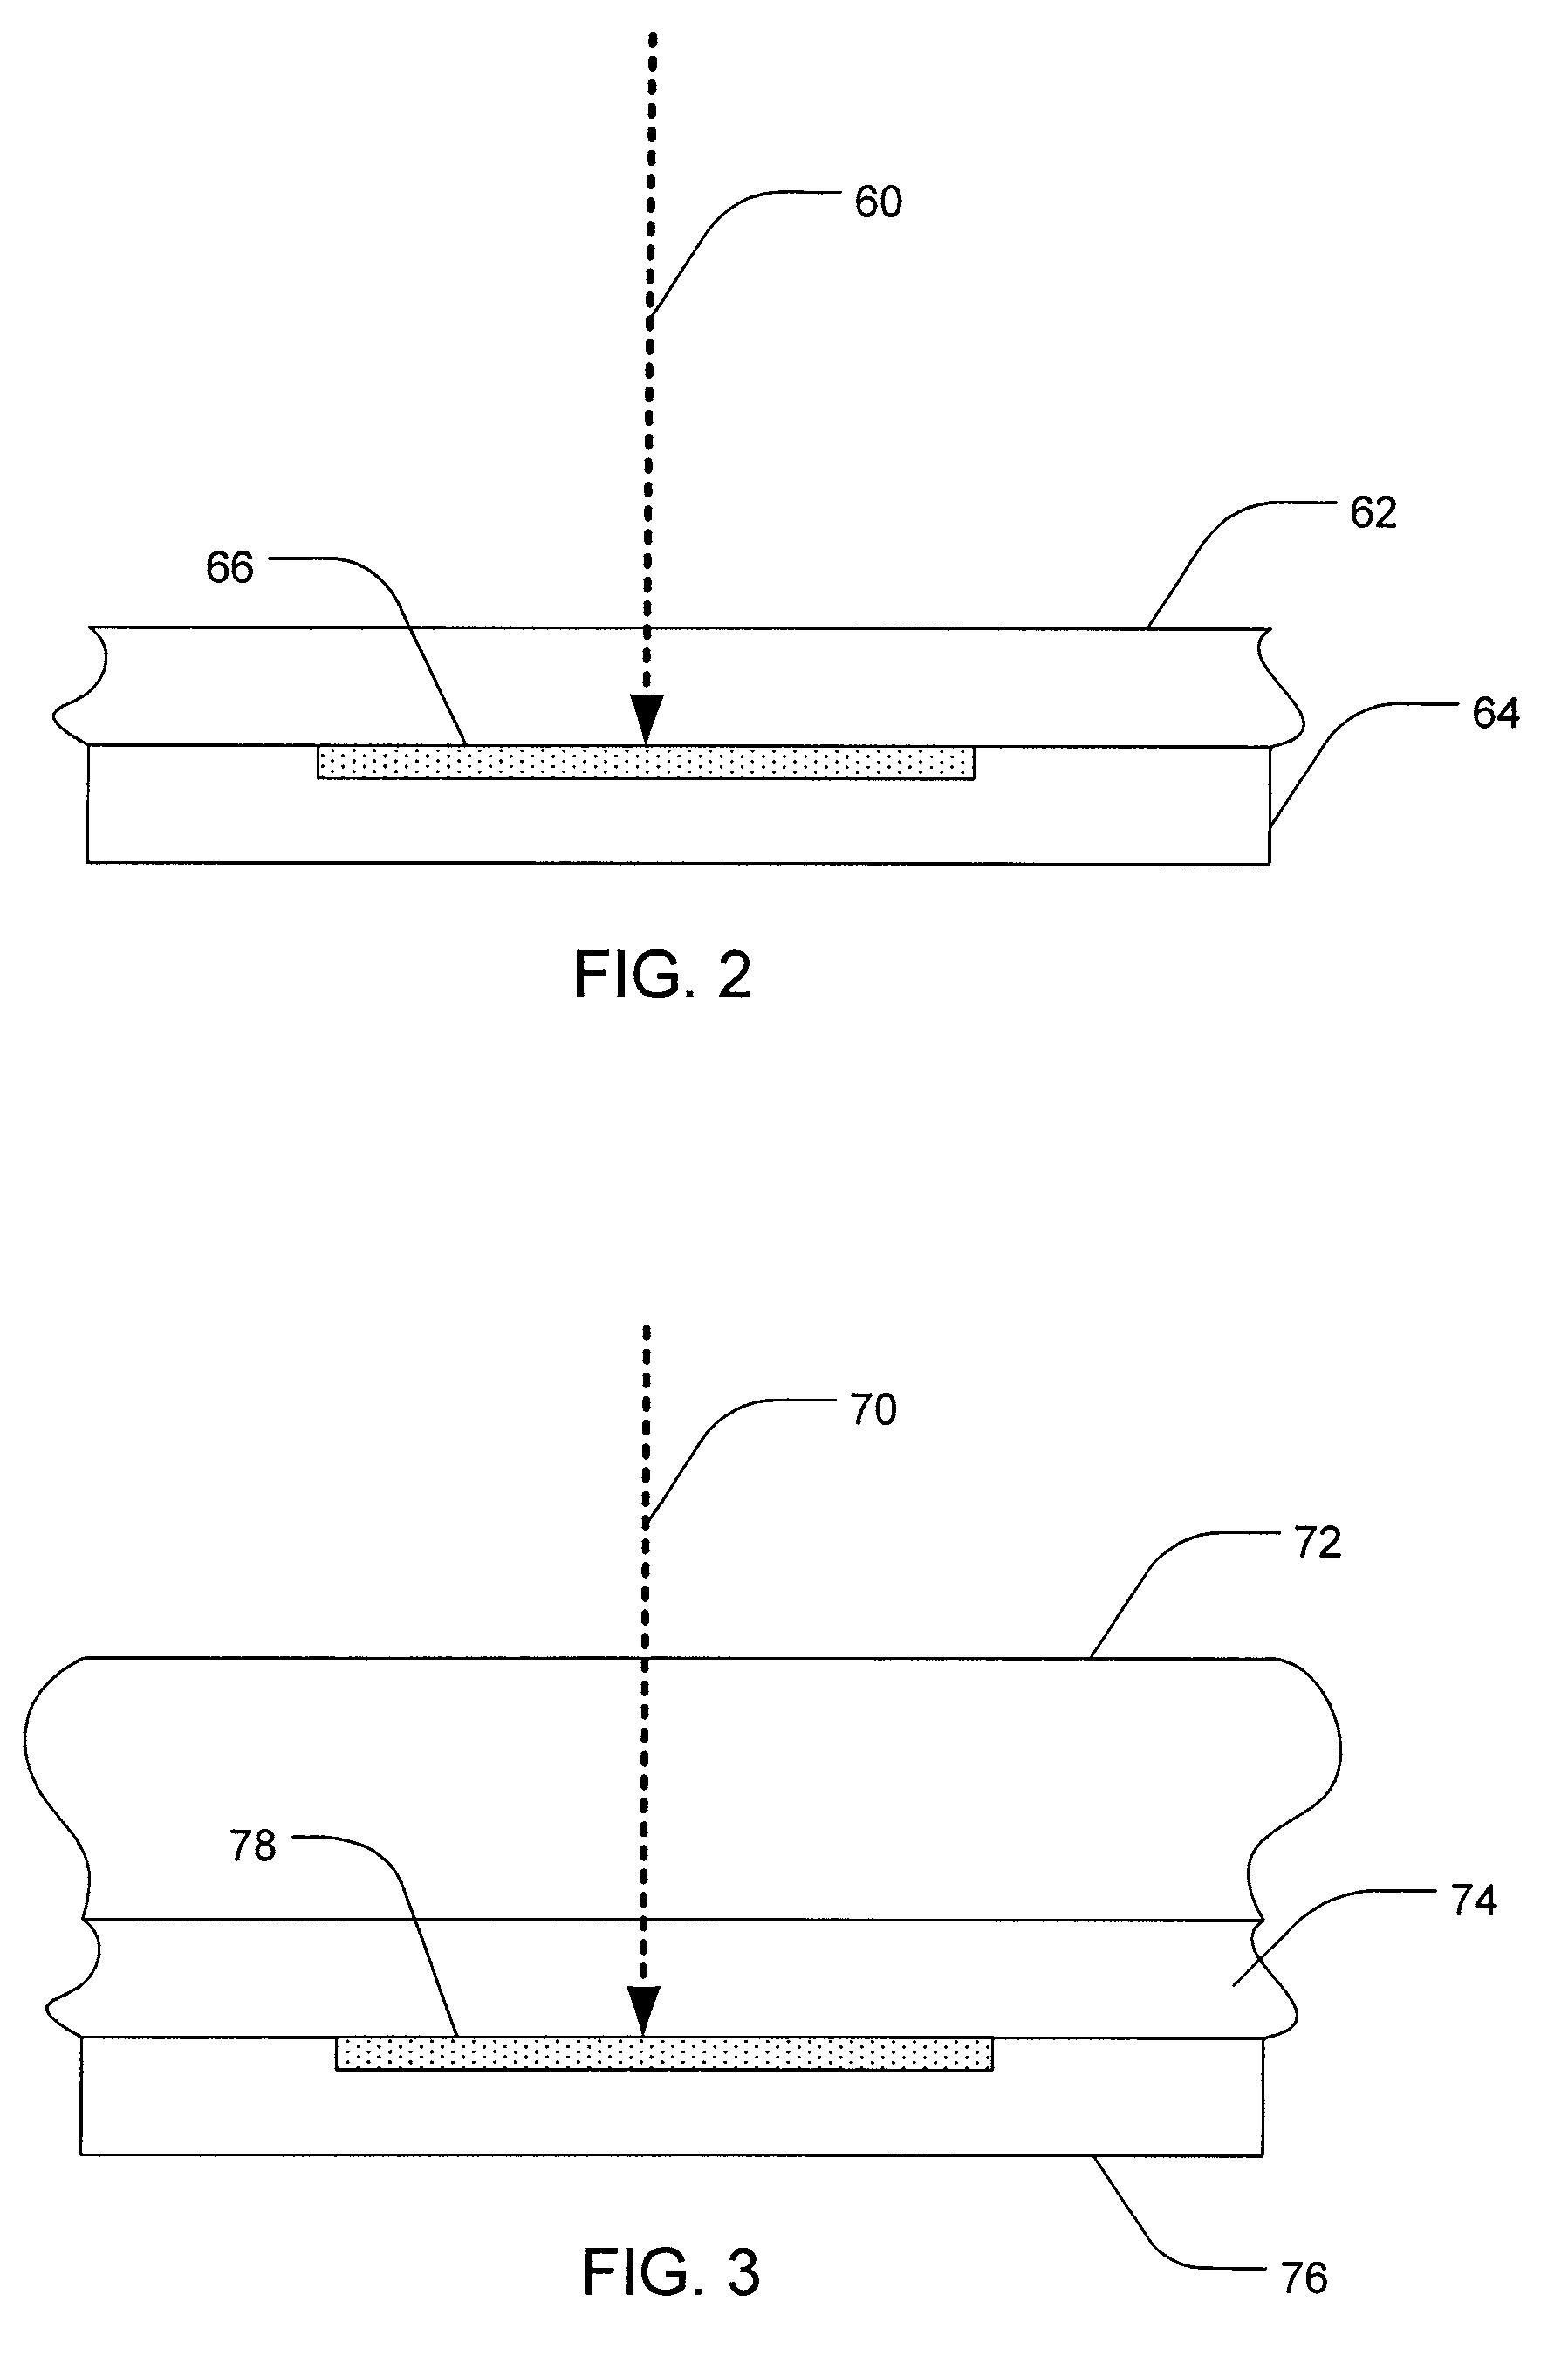 Semiconductor surface modification